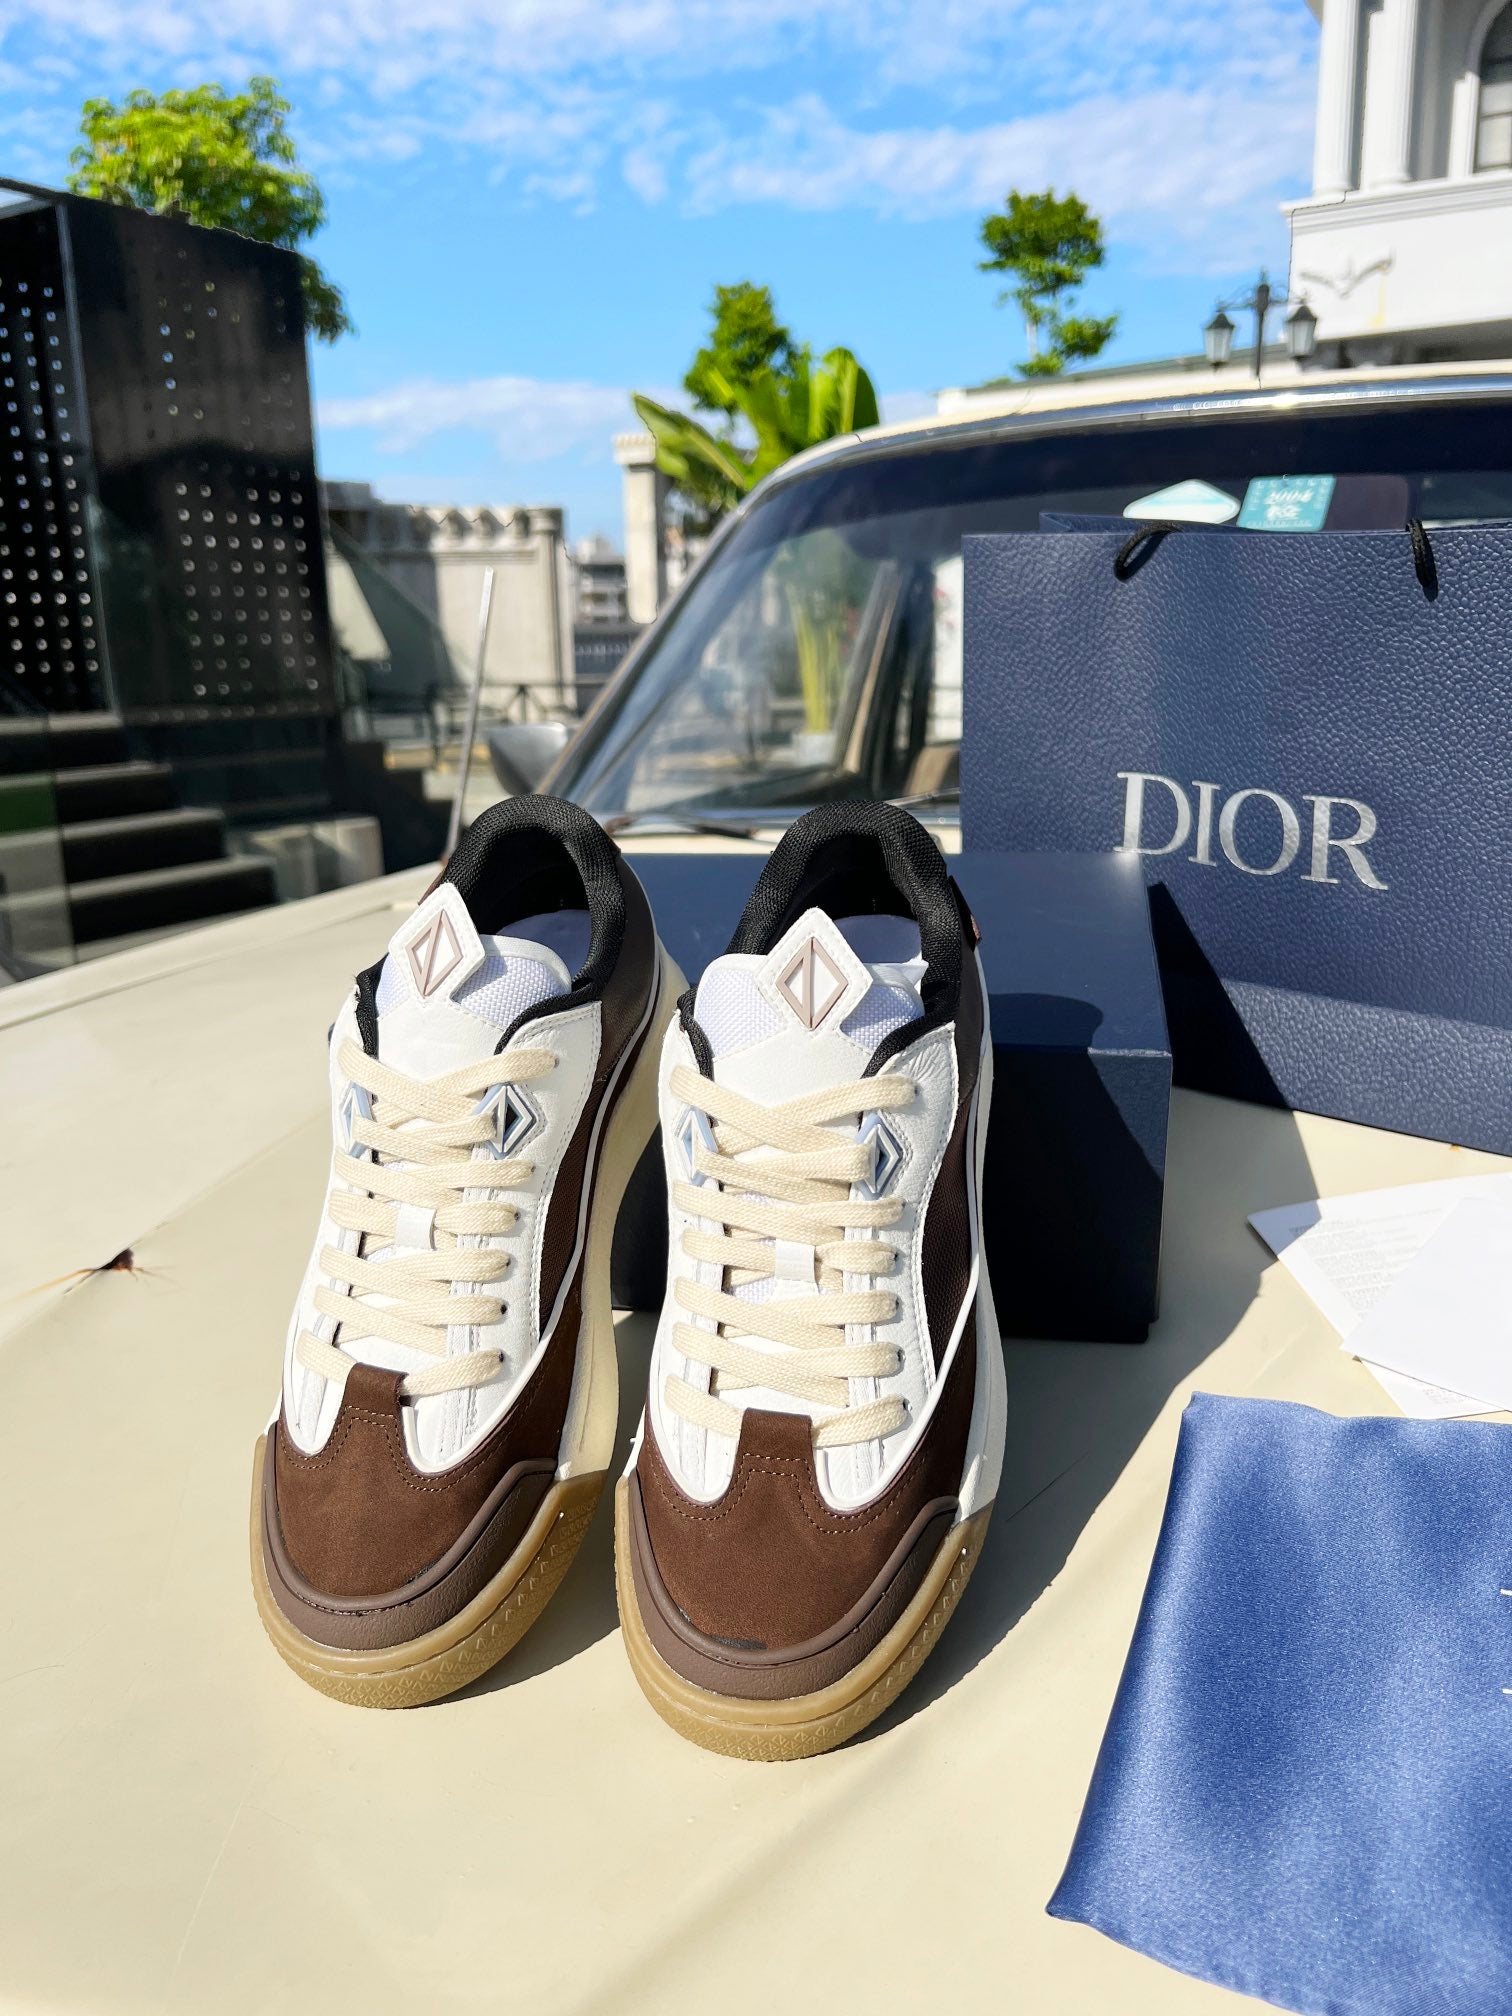 Christian Dior Fashion Casual Sneaker Shoes Y006